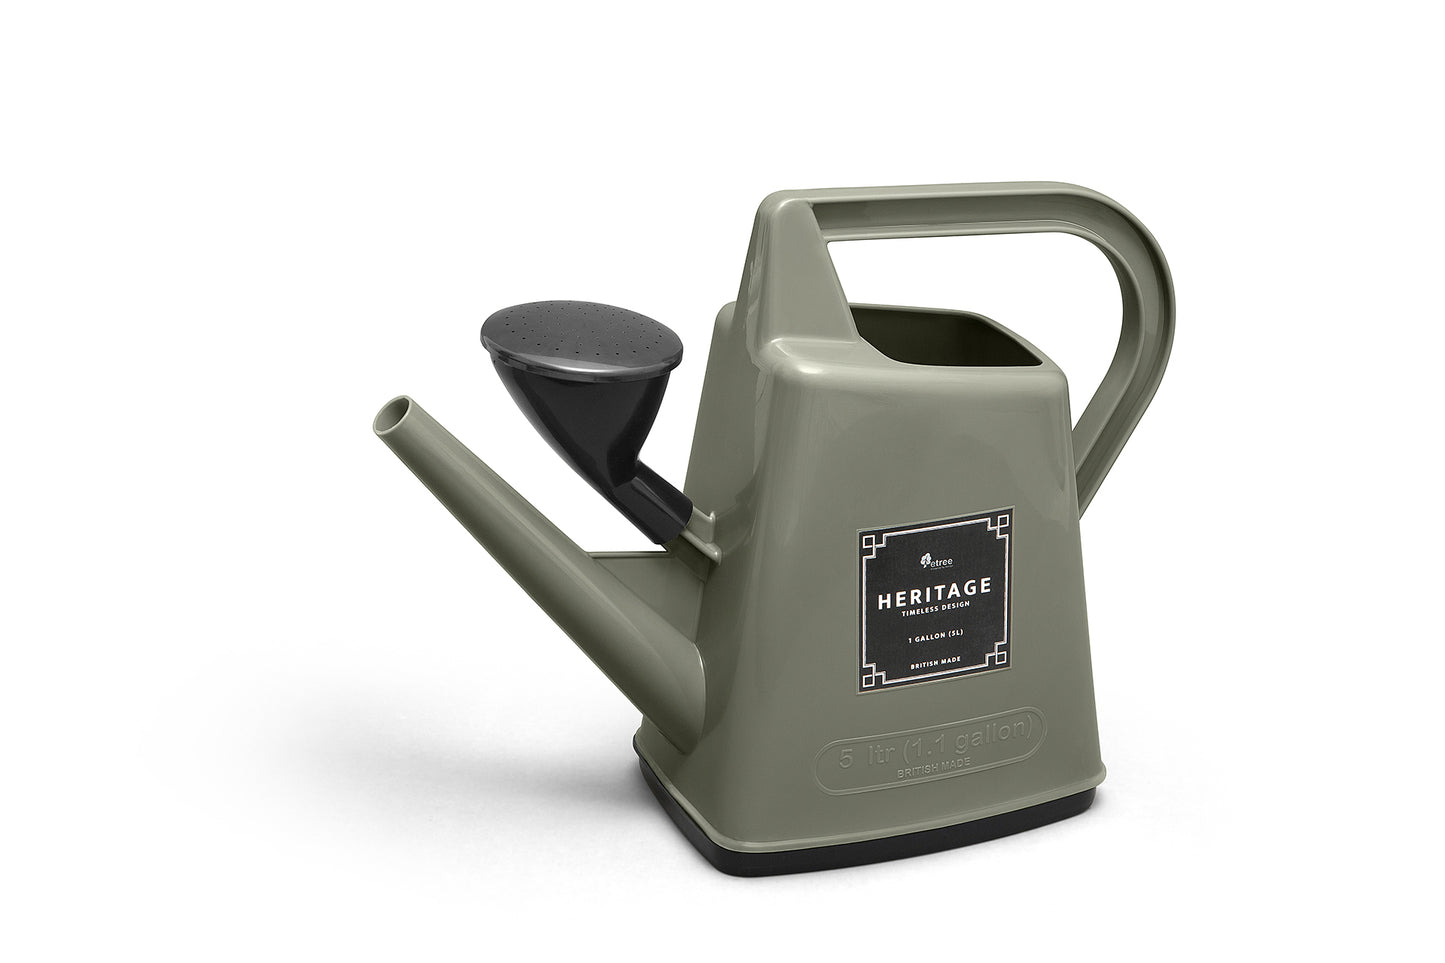 heavy duty watering can british made in heritage slate green, for outdoor plants similar to a galvanised watering can 